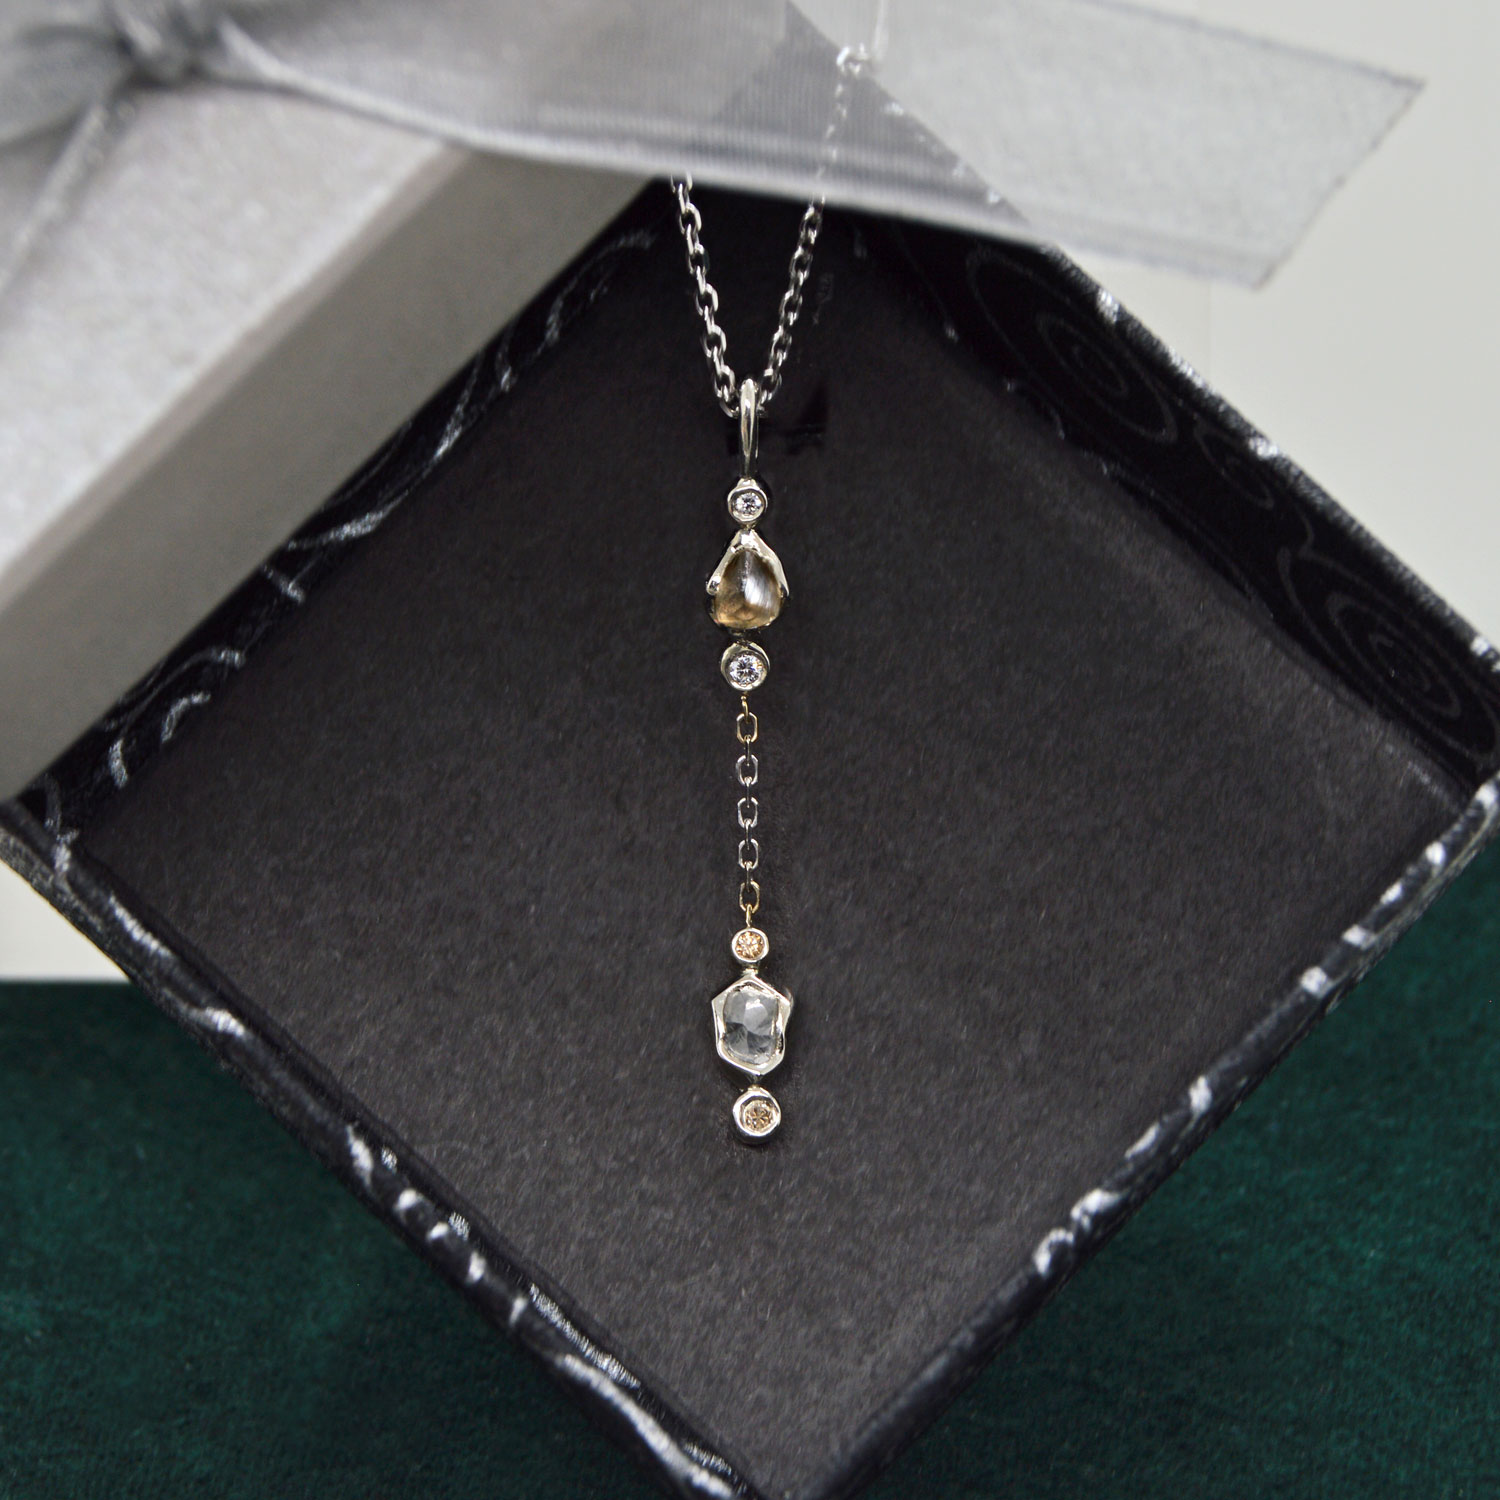 Natural raw diamonds in lariat style pendant with matching chain. 14K white gold with full-cut diamond accents. Designed by Morgan's Treasure in Westerville, OH